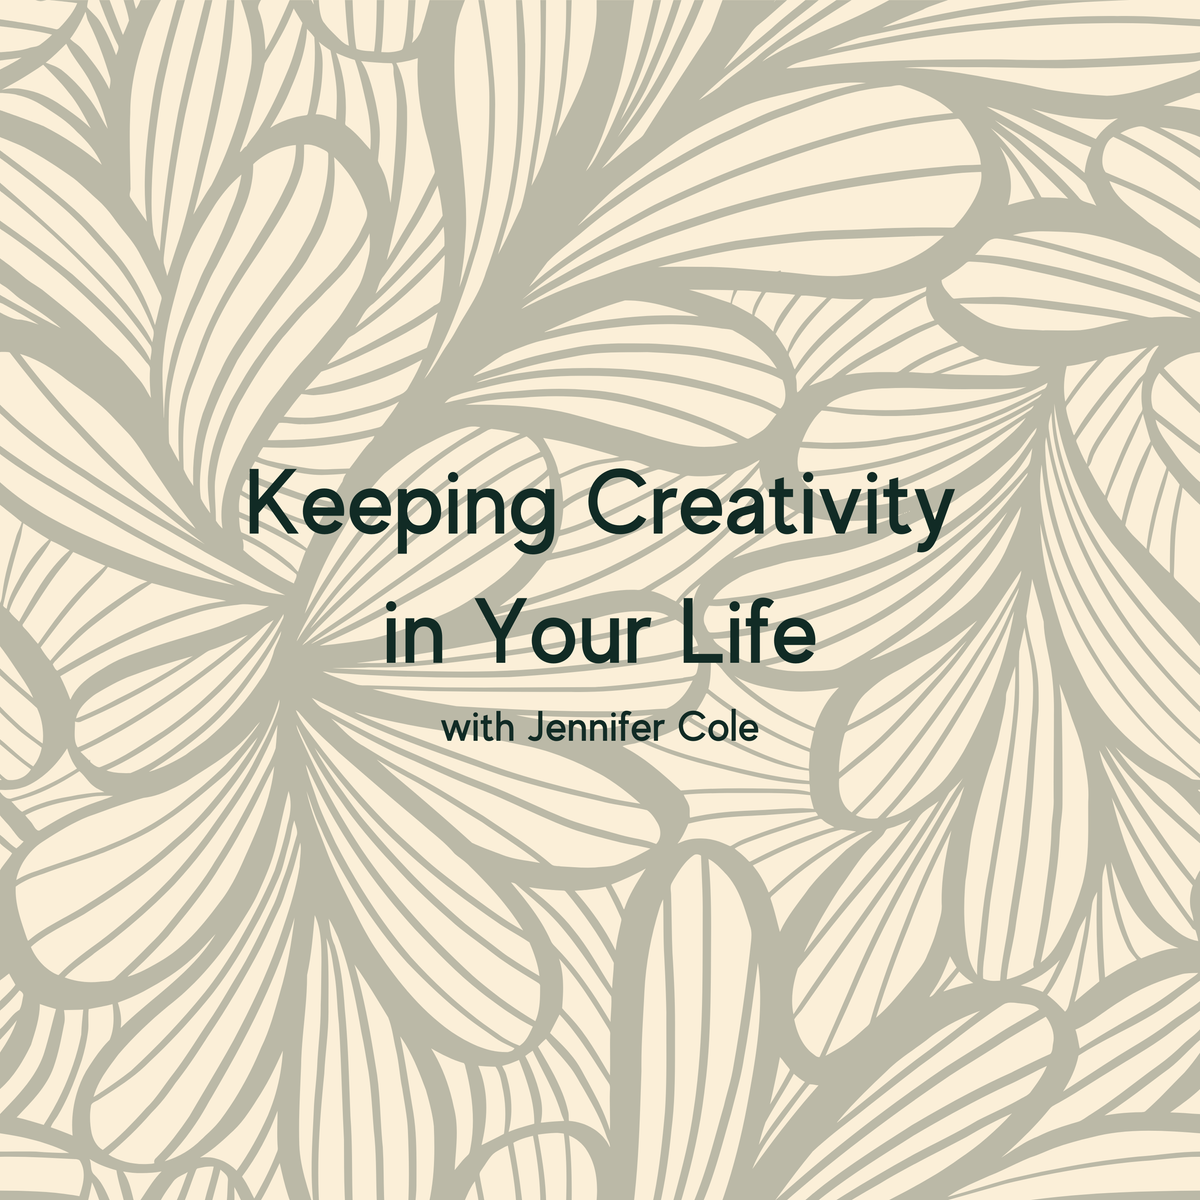 Keeping Creativity in Your Life with Jennifer Cole